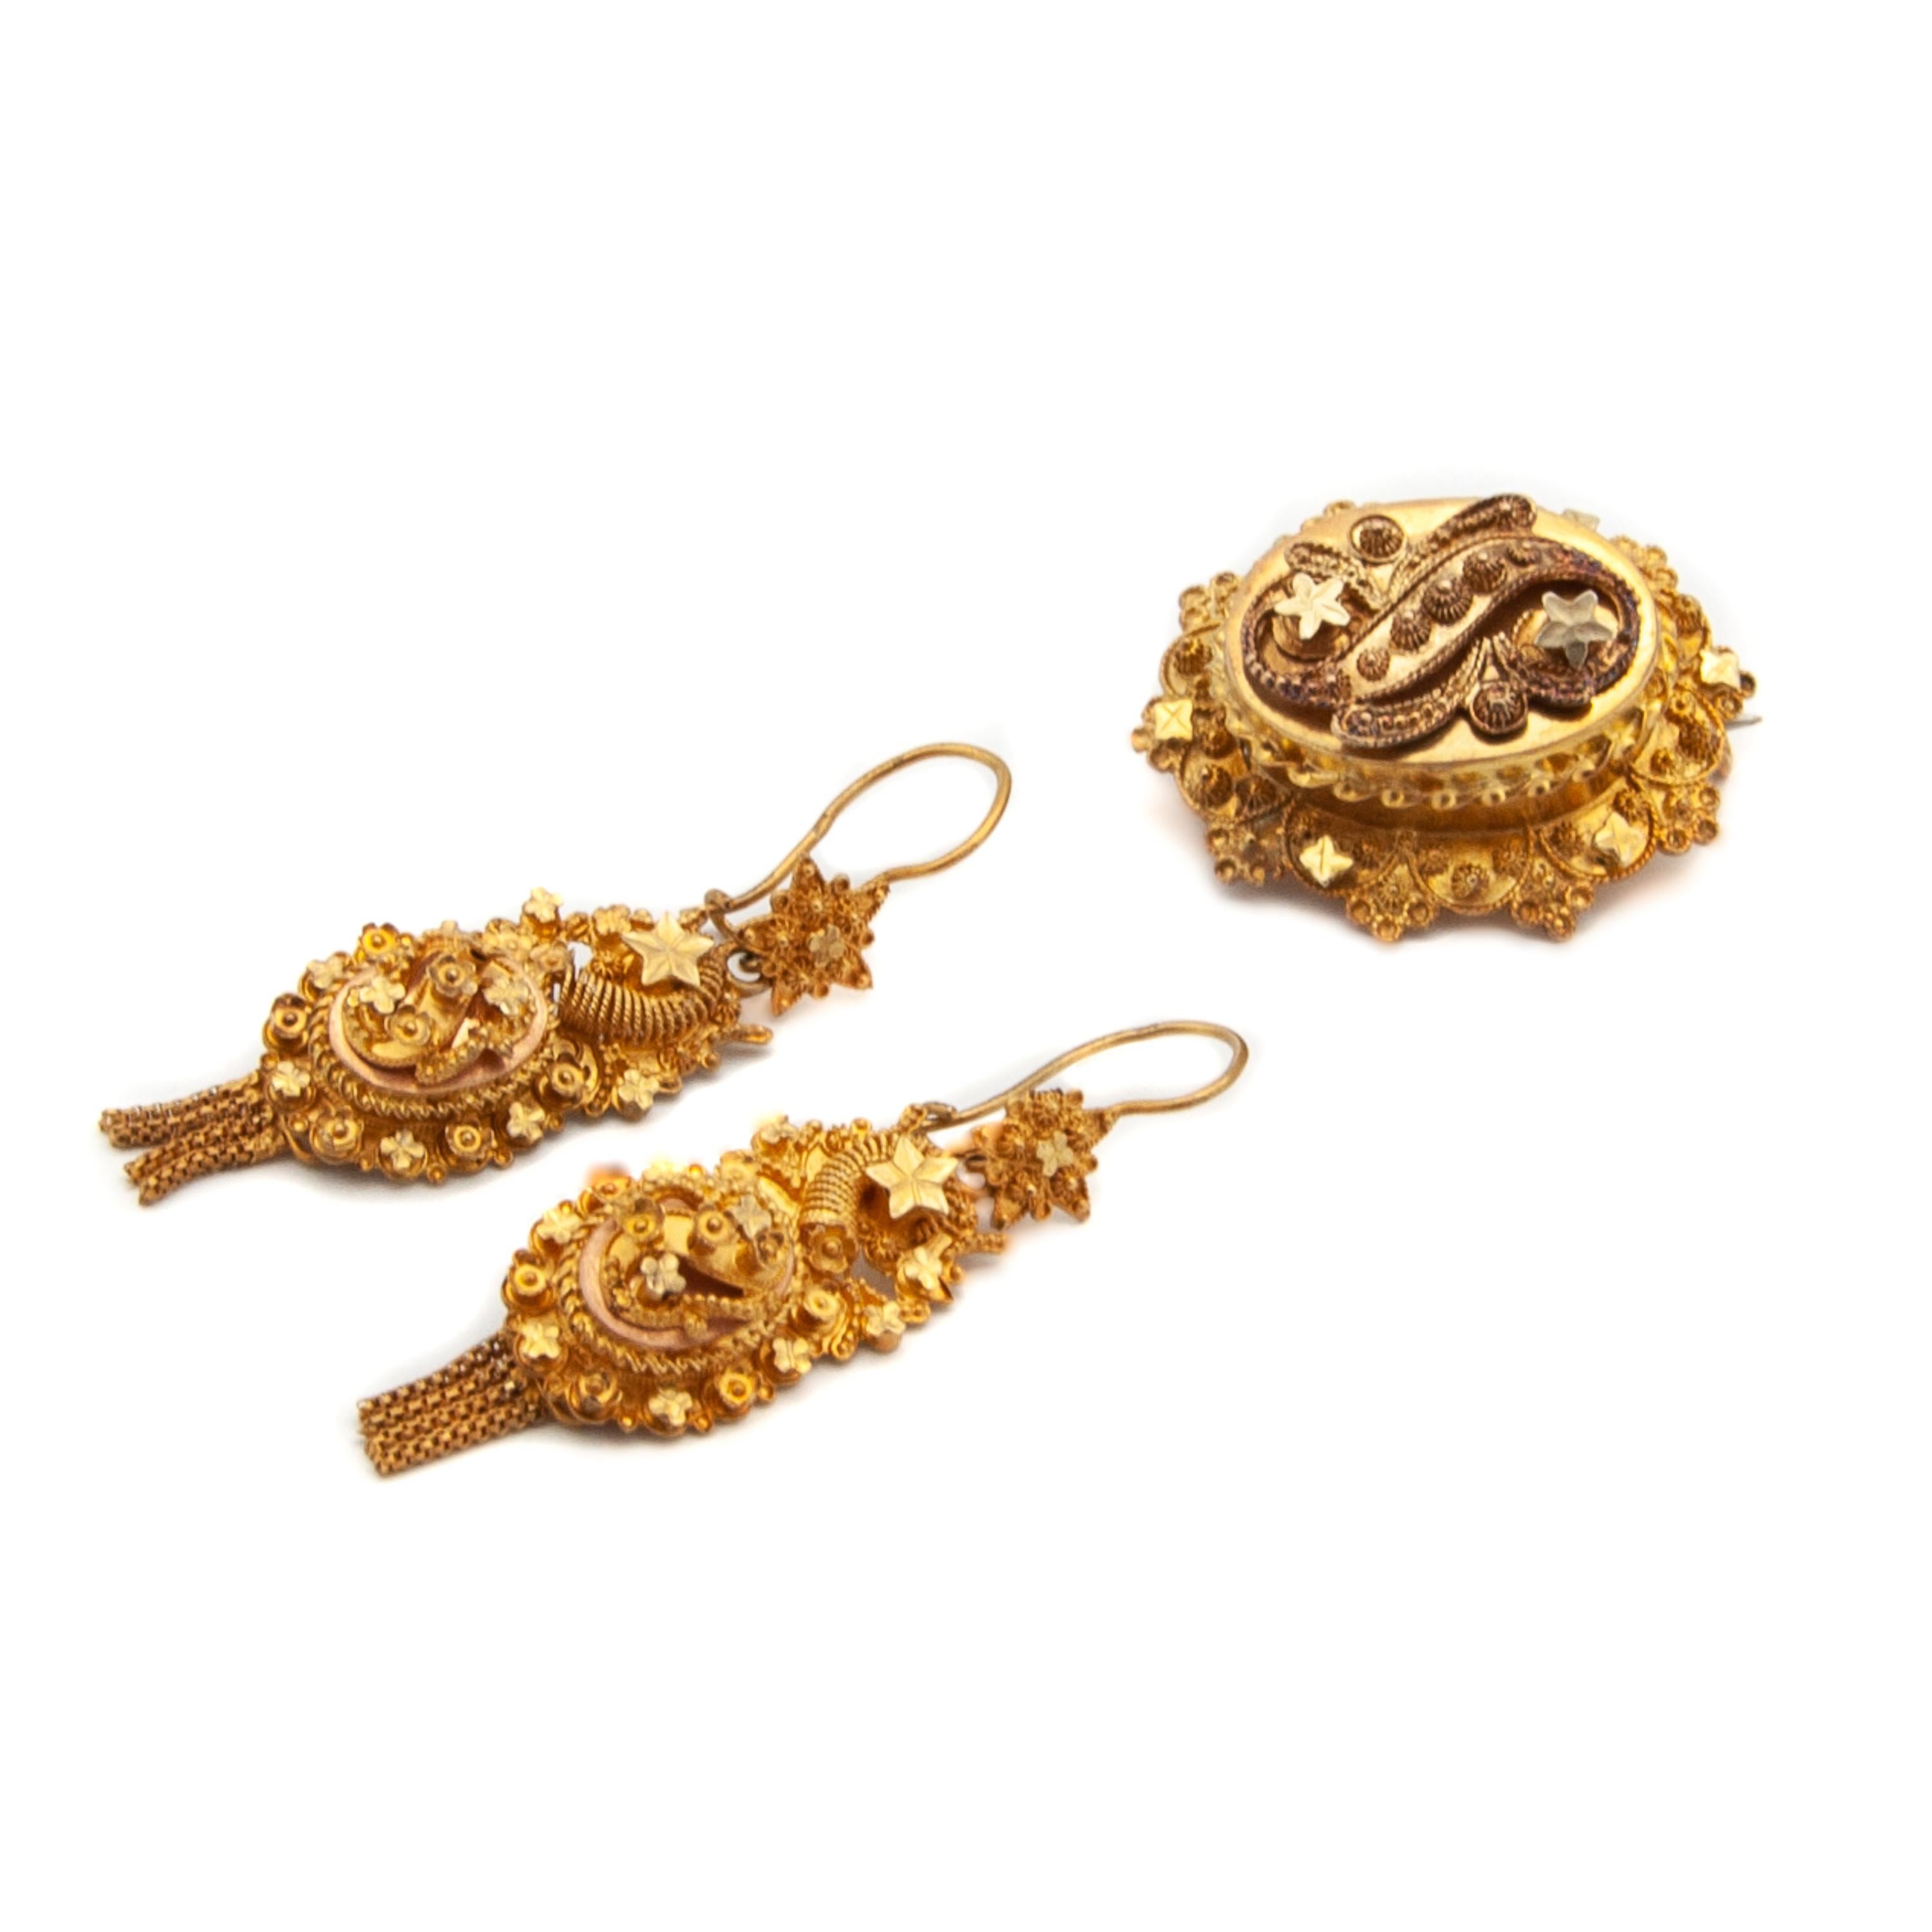 Antique 14K Yellow Gold Tassel Earrings and Brooch, Jewelry Set In Good Condition For Sale In Rotterdam, NL